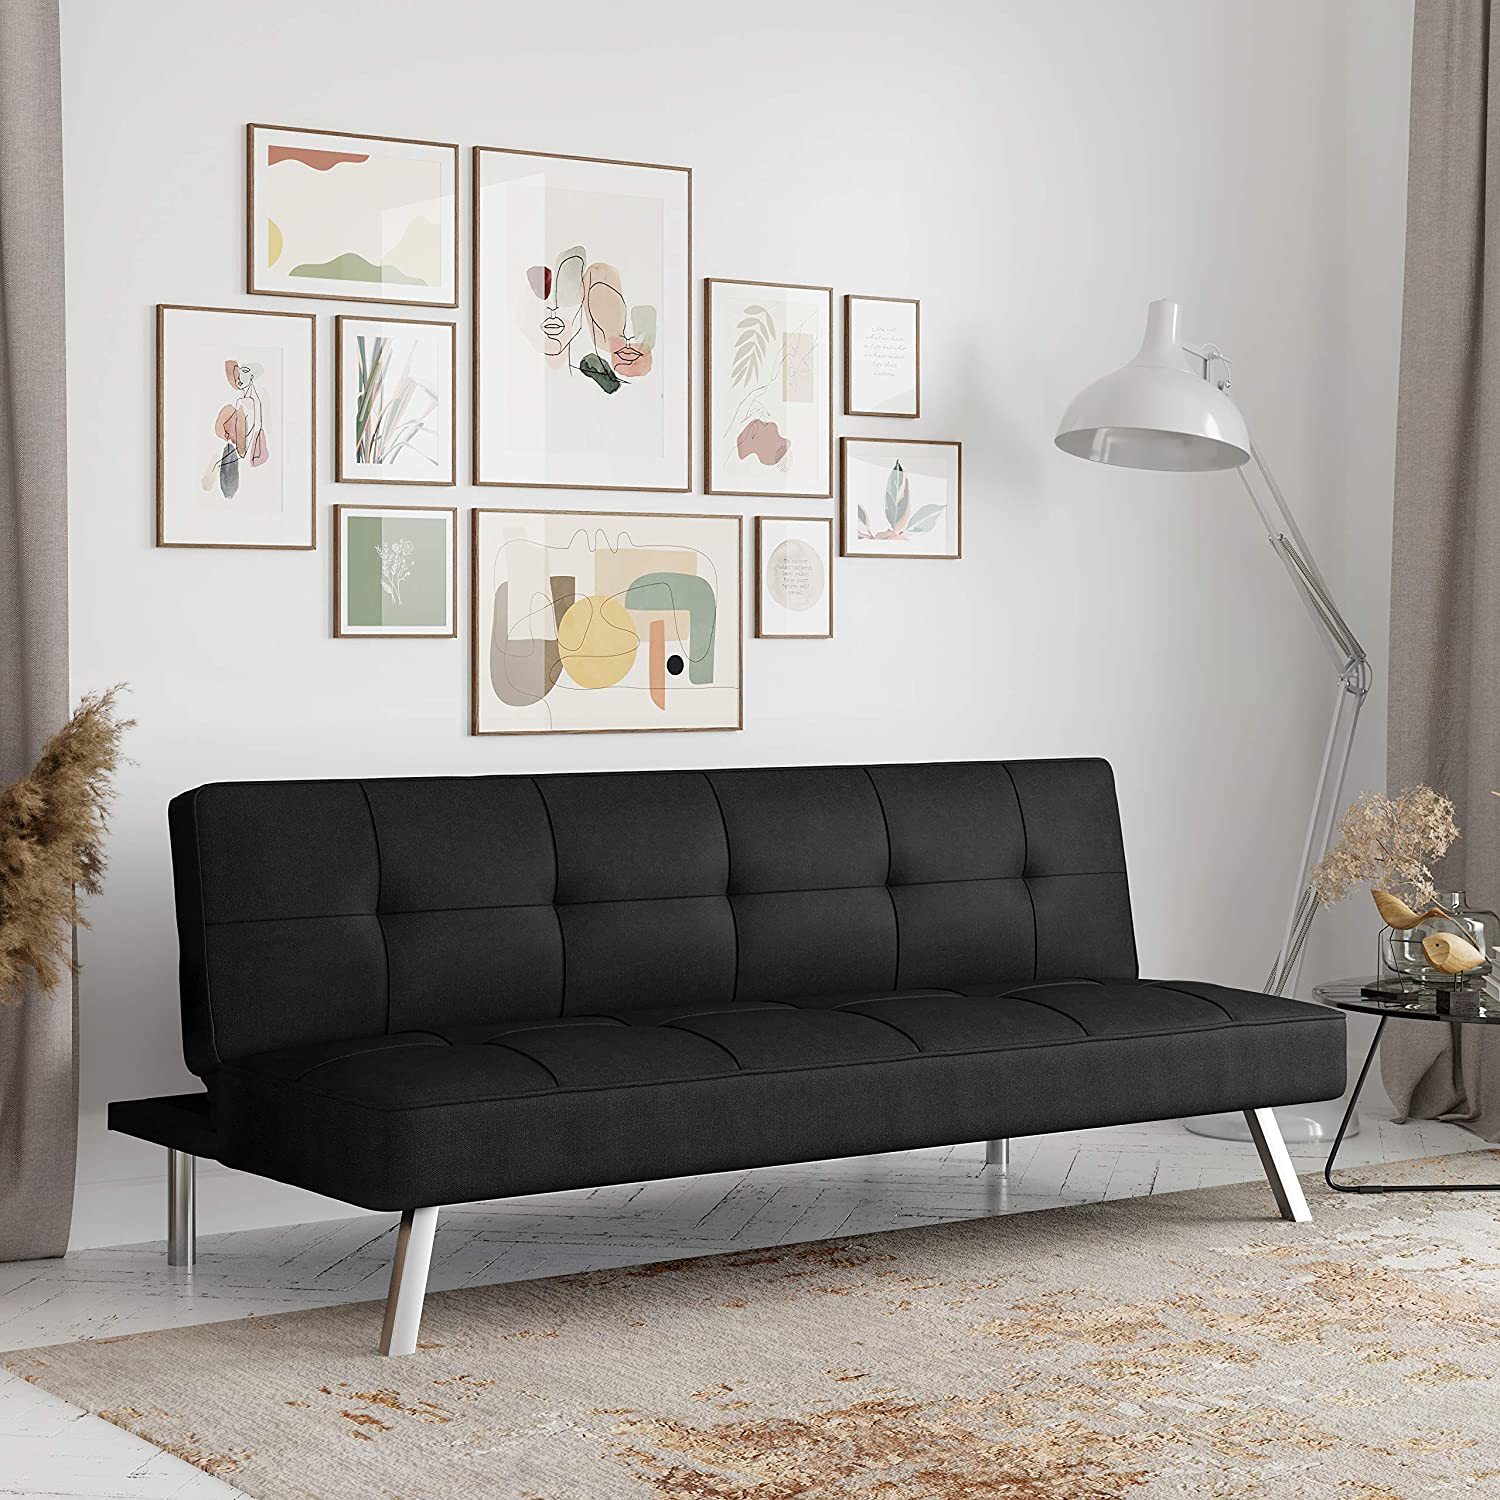 Primary image for Serta Rane Convertible Sofa Bed, 66.1" W x 33.1" D x 29.5" H, Black